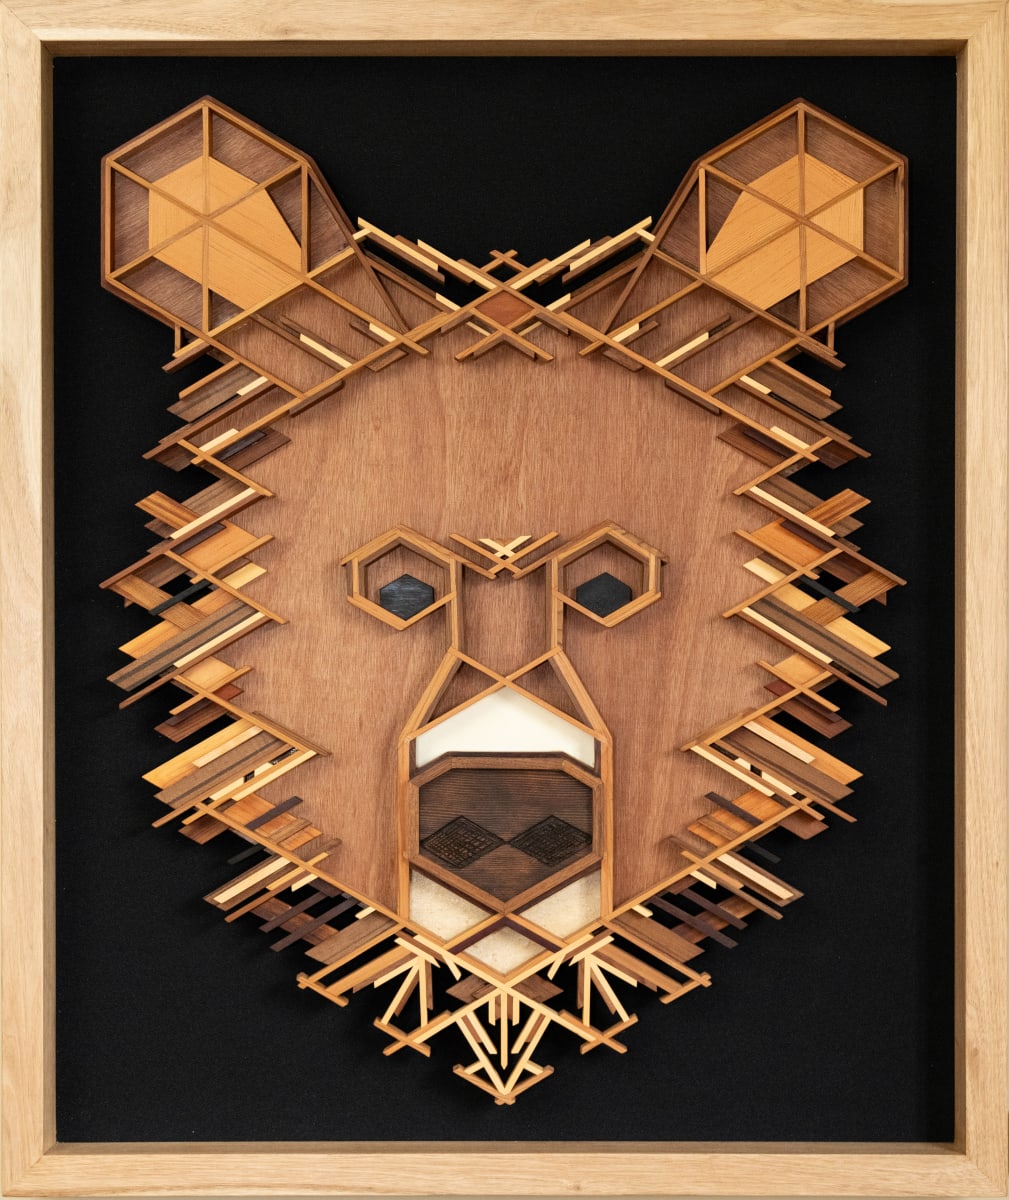 Grizz The Wiser by Robert E LeBlanc  Image: Grizz is king of the mountain. Framed in repurposed oak, with a cloth background.